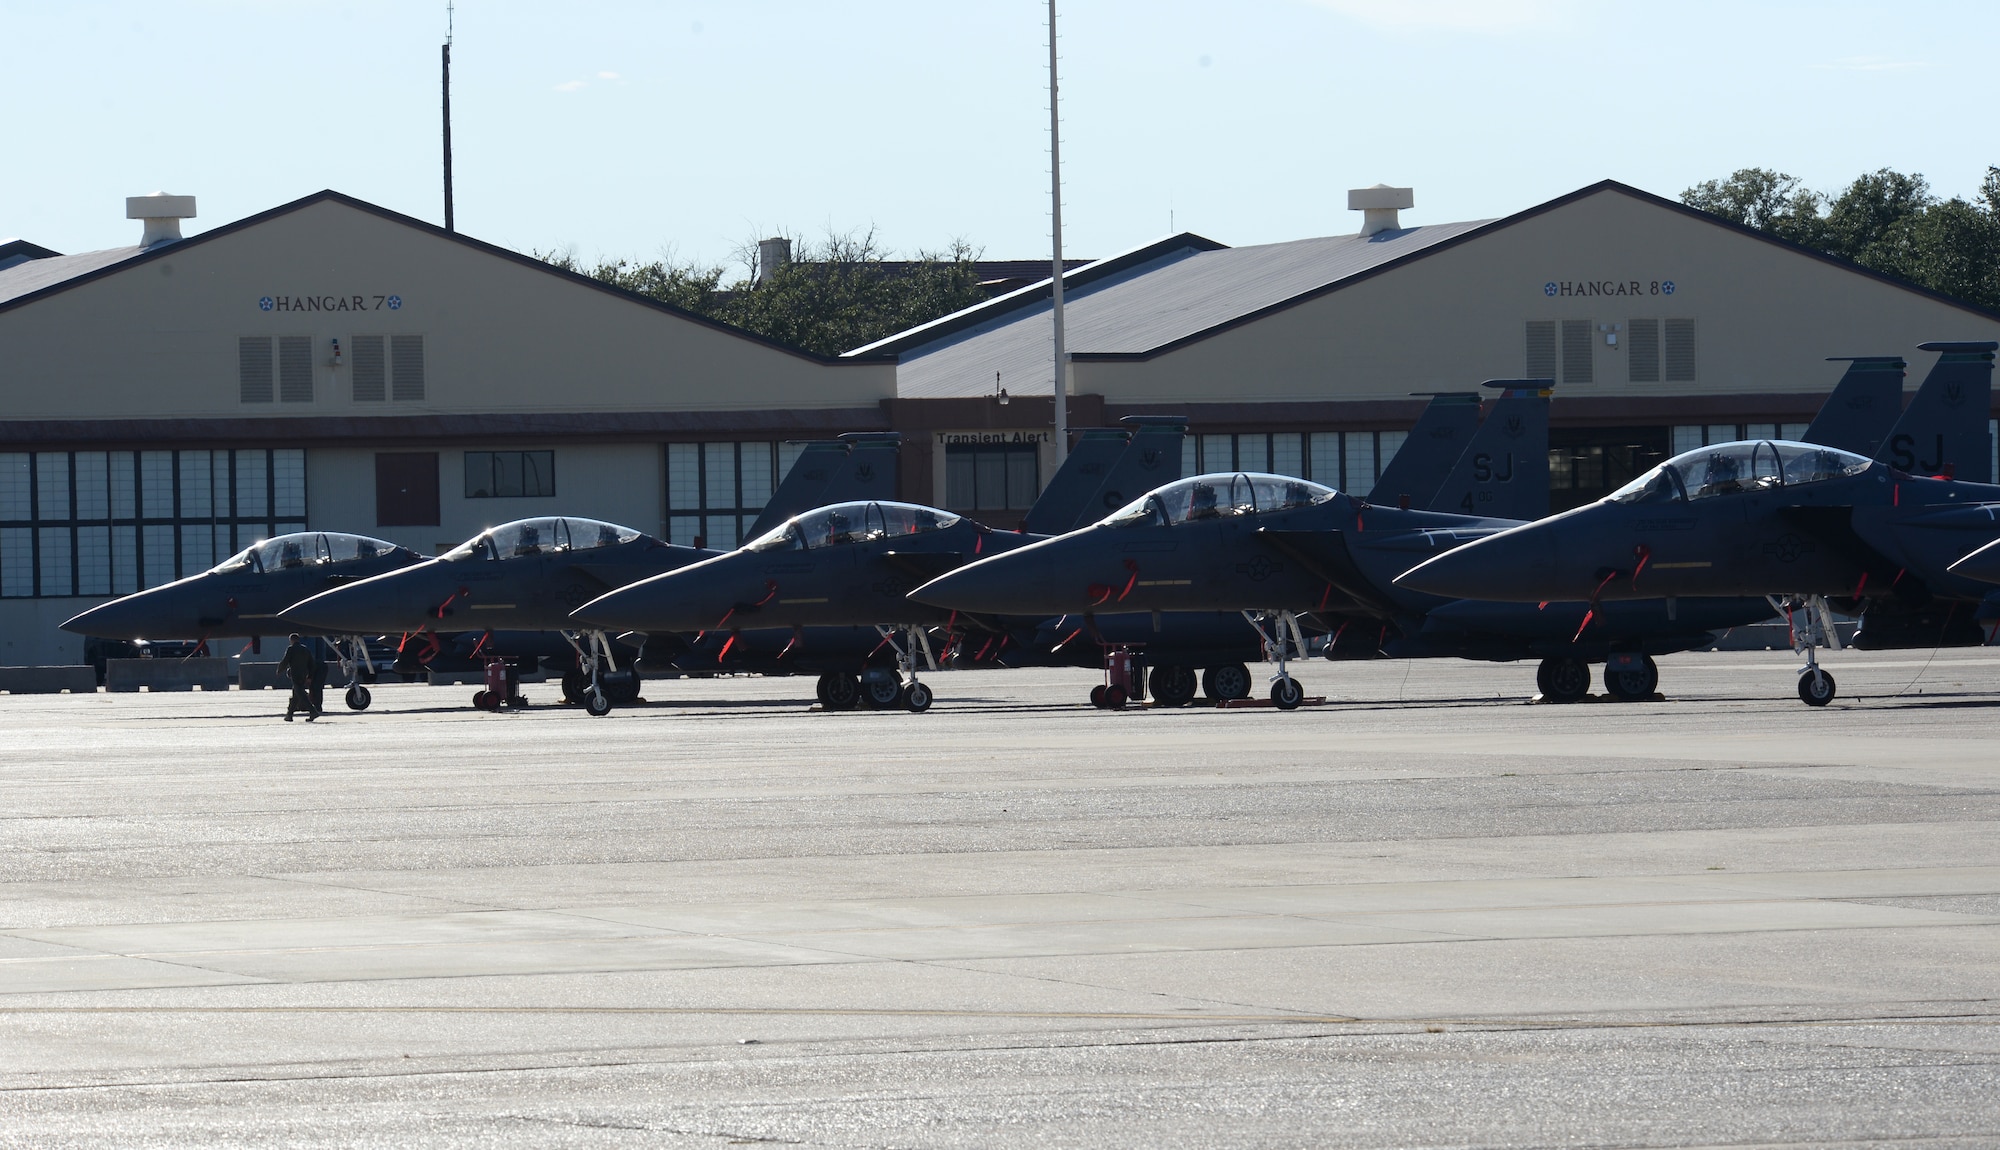 Five F-15E Strike Eagles rest on the flightline at Barksdale Air Force Base, La., Oct. 1, 2015. More than 60 aircraft from Seymour Johnson AFB, N.C., were relocated to avoid potential damage from Hurricane Joaquin along the East Coast. (U.S. Air Force photo/Airman 1st Class Curt Beach)